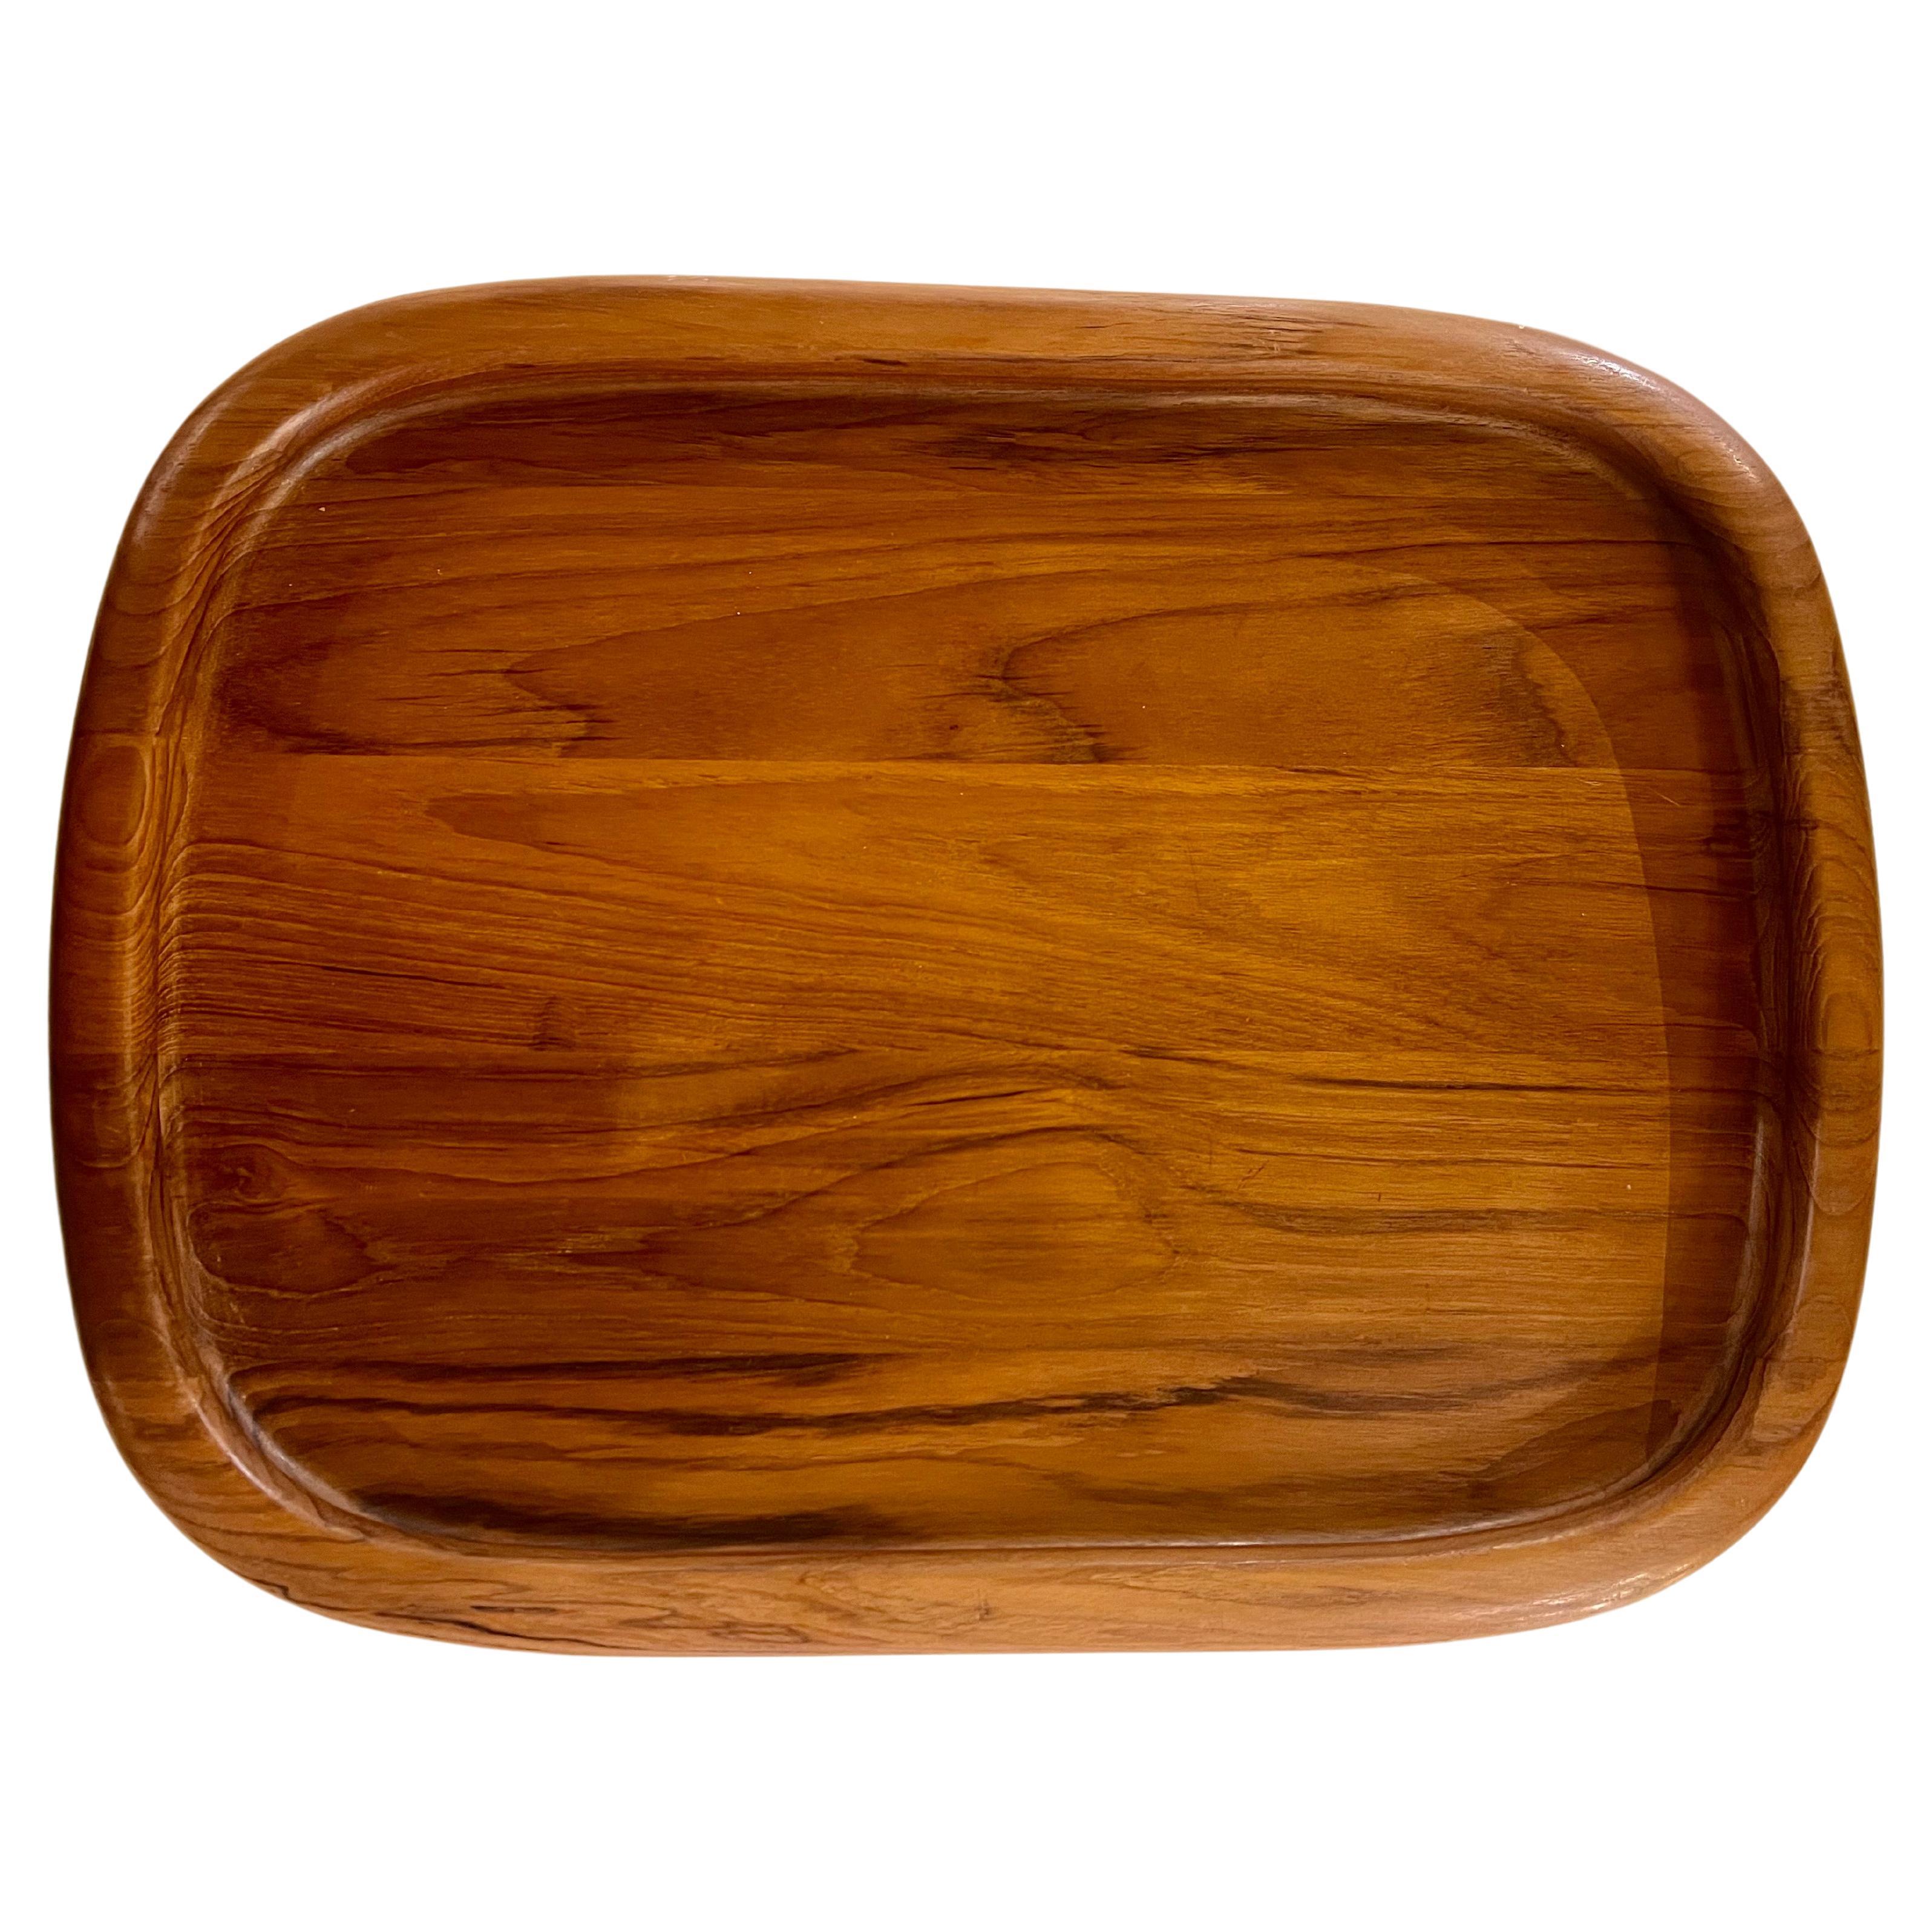 Beautiful solid teak Dansk tray circa 1980's. designed by Quistgaard for Dansk nice round corners with raised edge stamped at the bottom , great condition a must for any danish Modern Mid Century home decor.